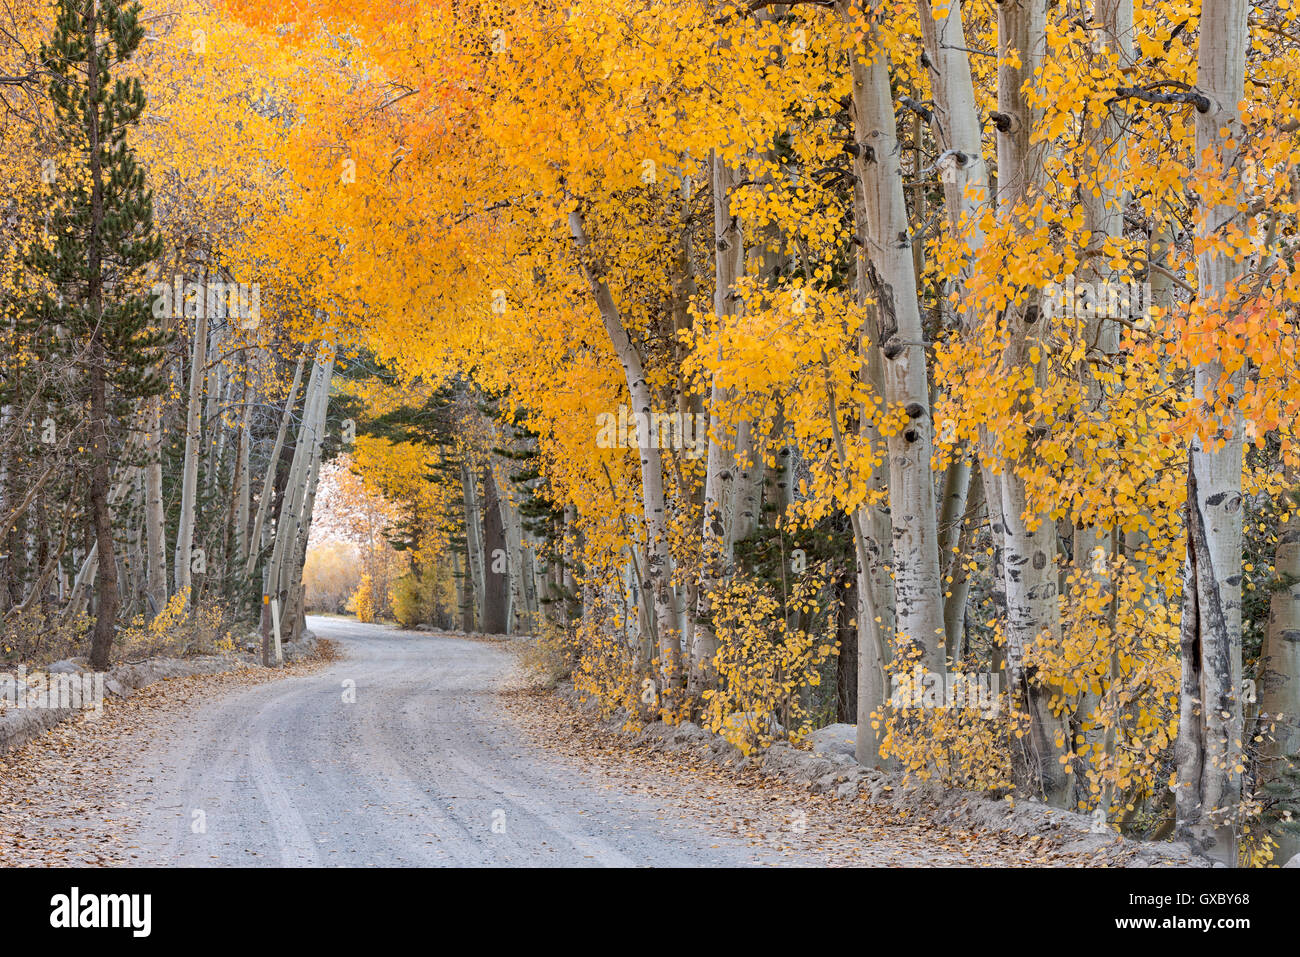 Dirt road winding through a tree tunnel, Bishop, California, USA. Autumn (October) 2014. Stock Photo